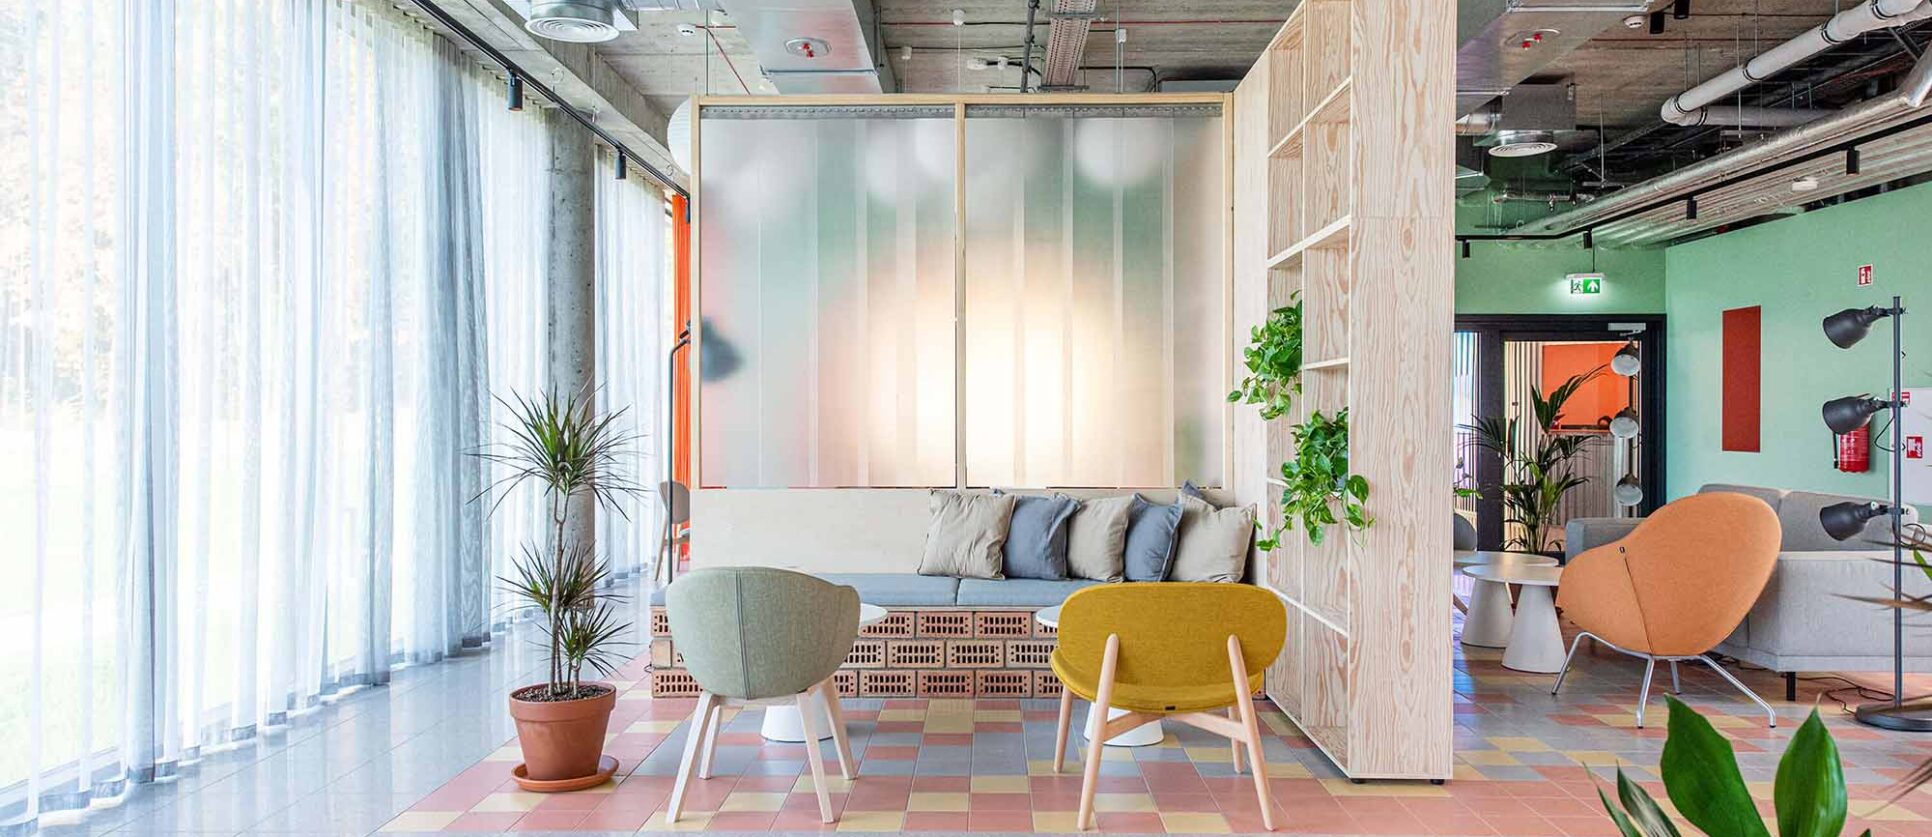 “SHED Co-living” – the modern student co-living space in Vilnius